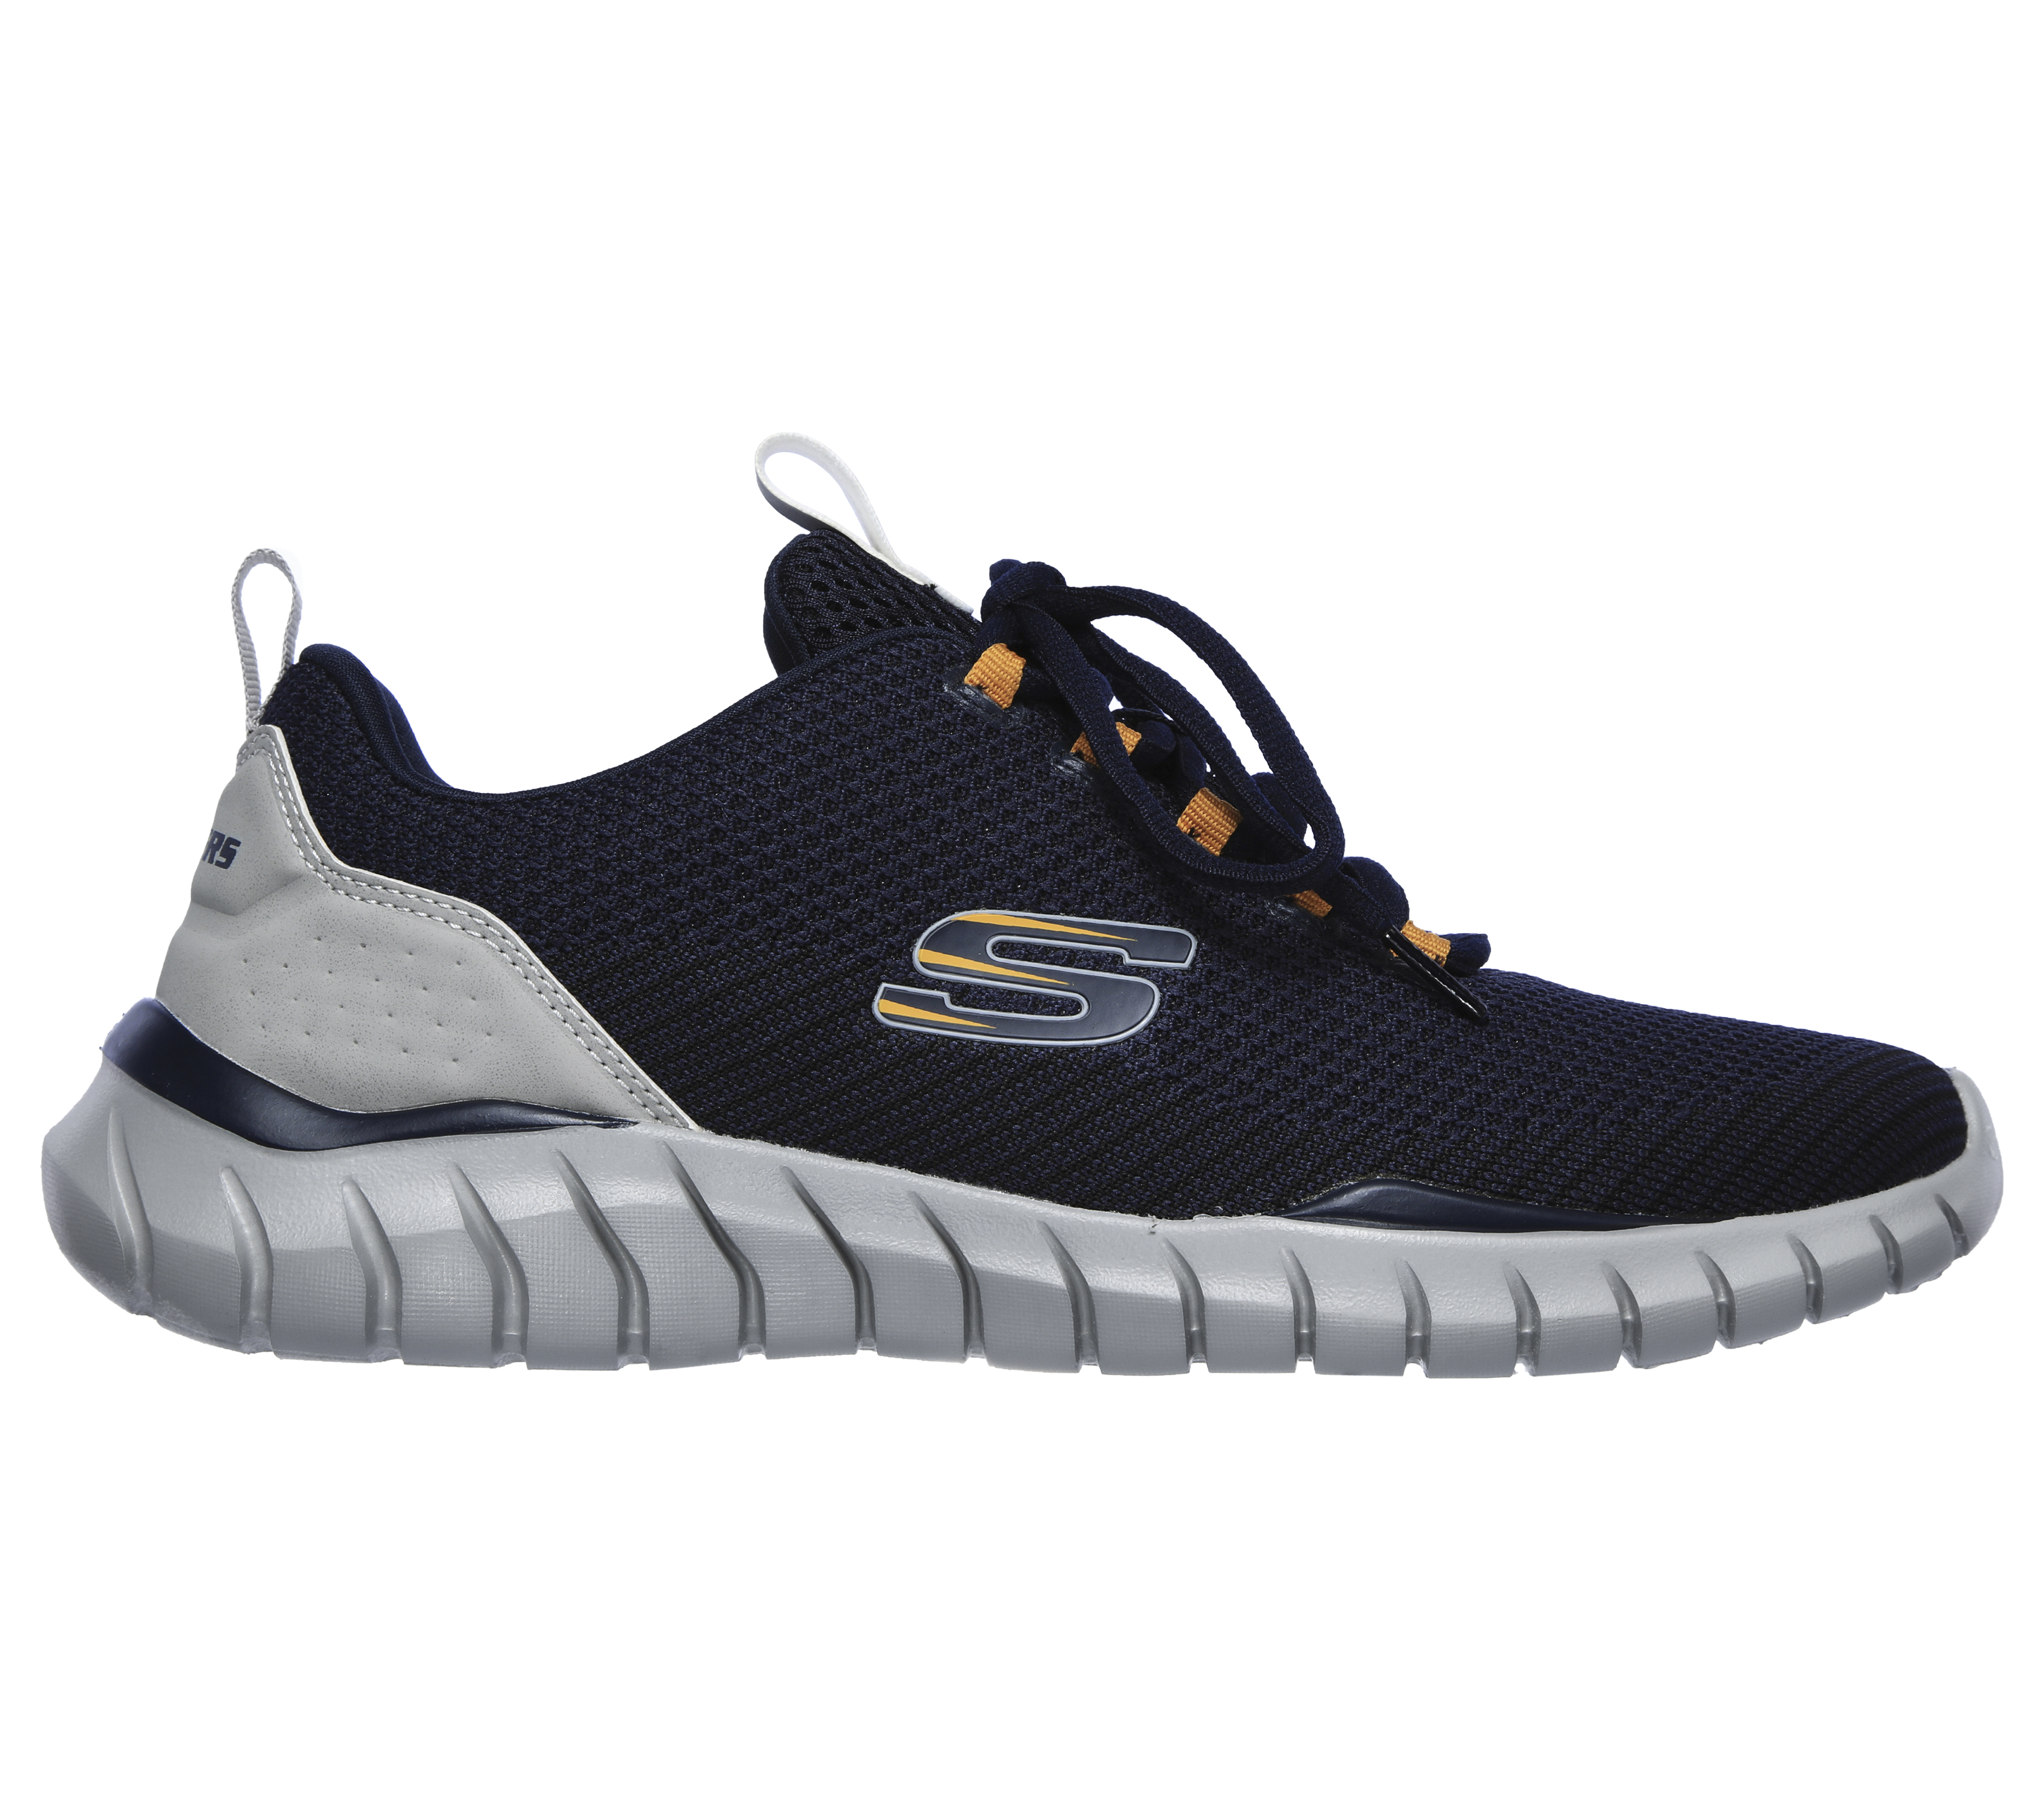 skechers free shoes